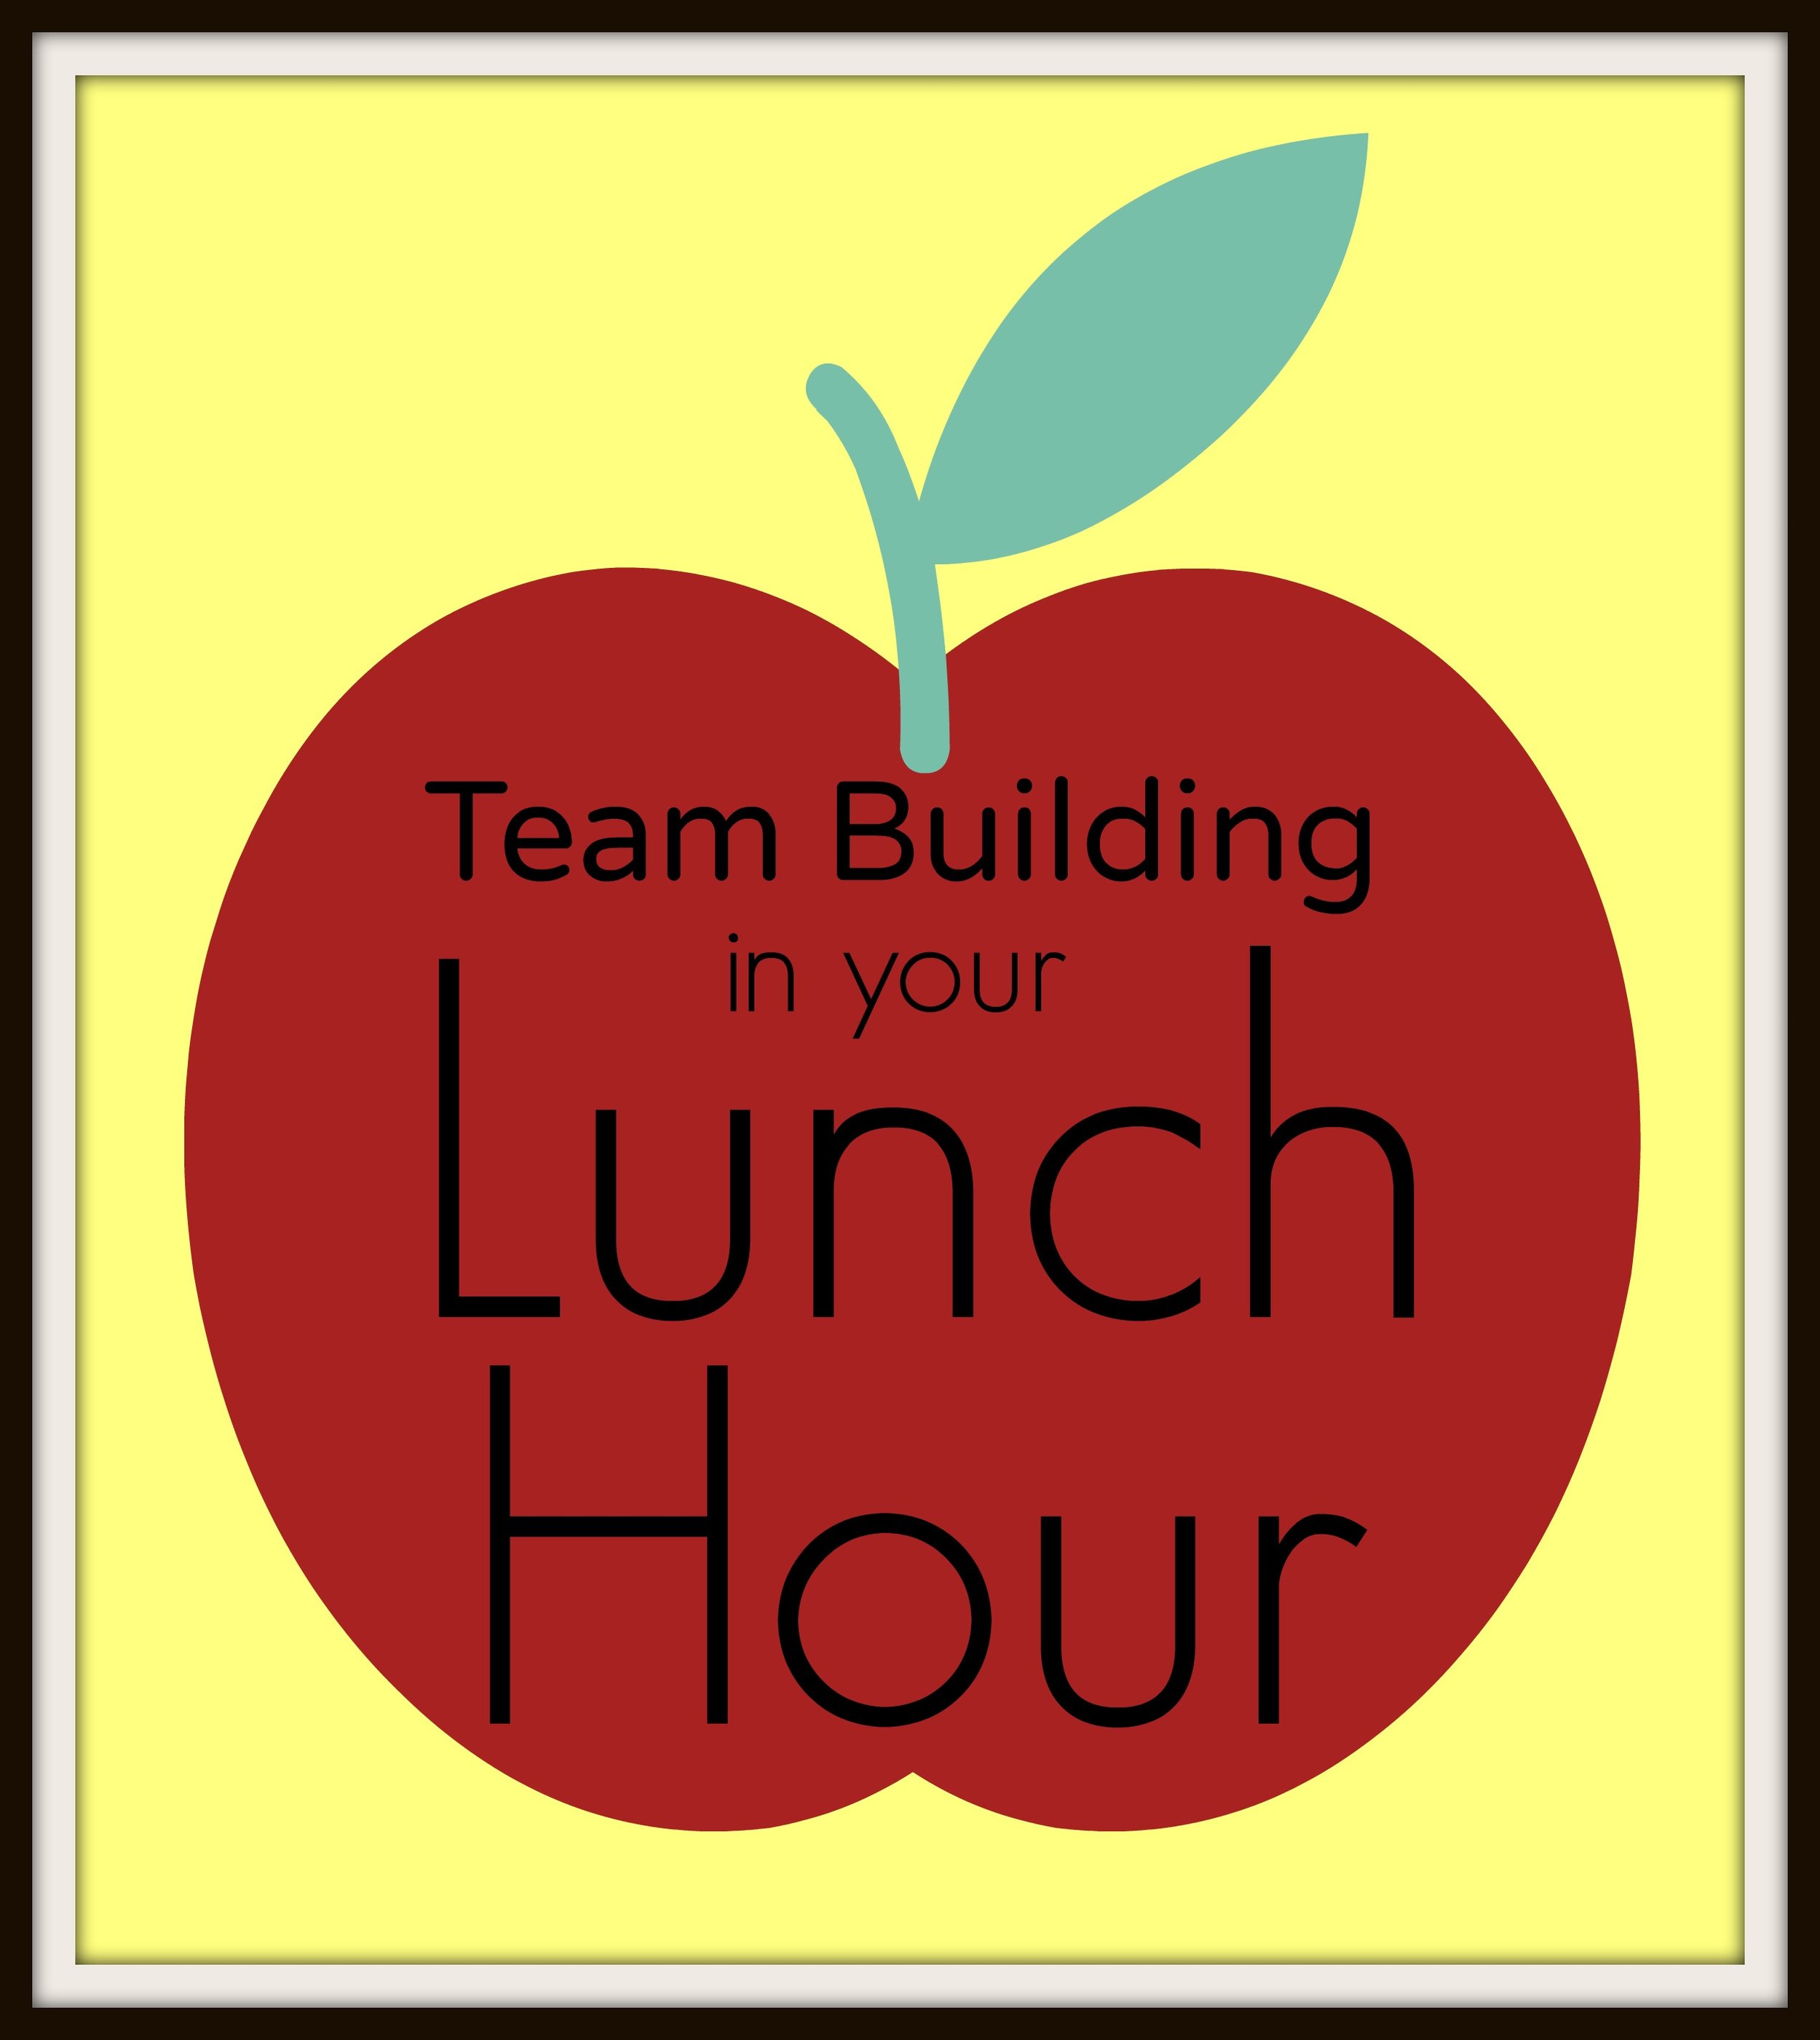 Team Building in your Lunch Hour